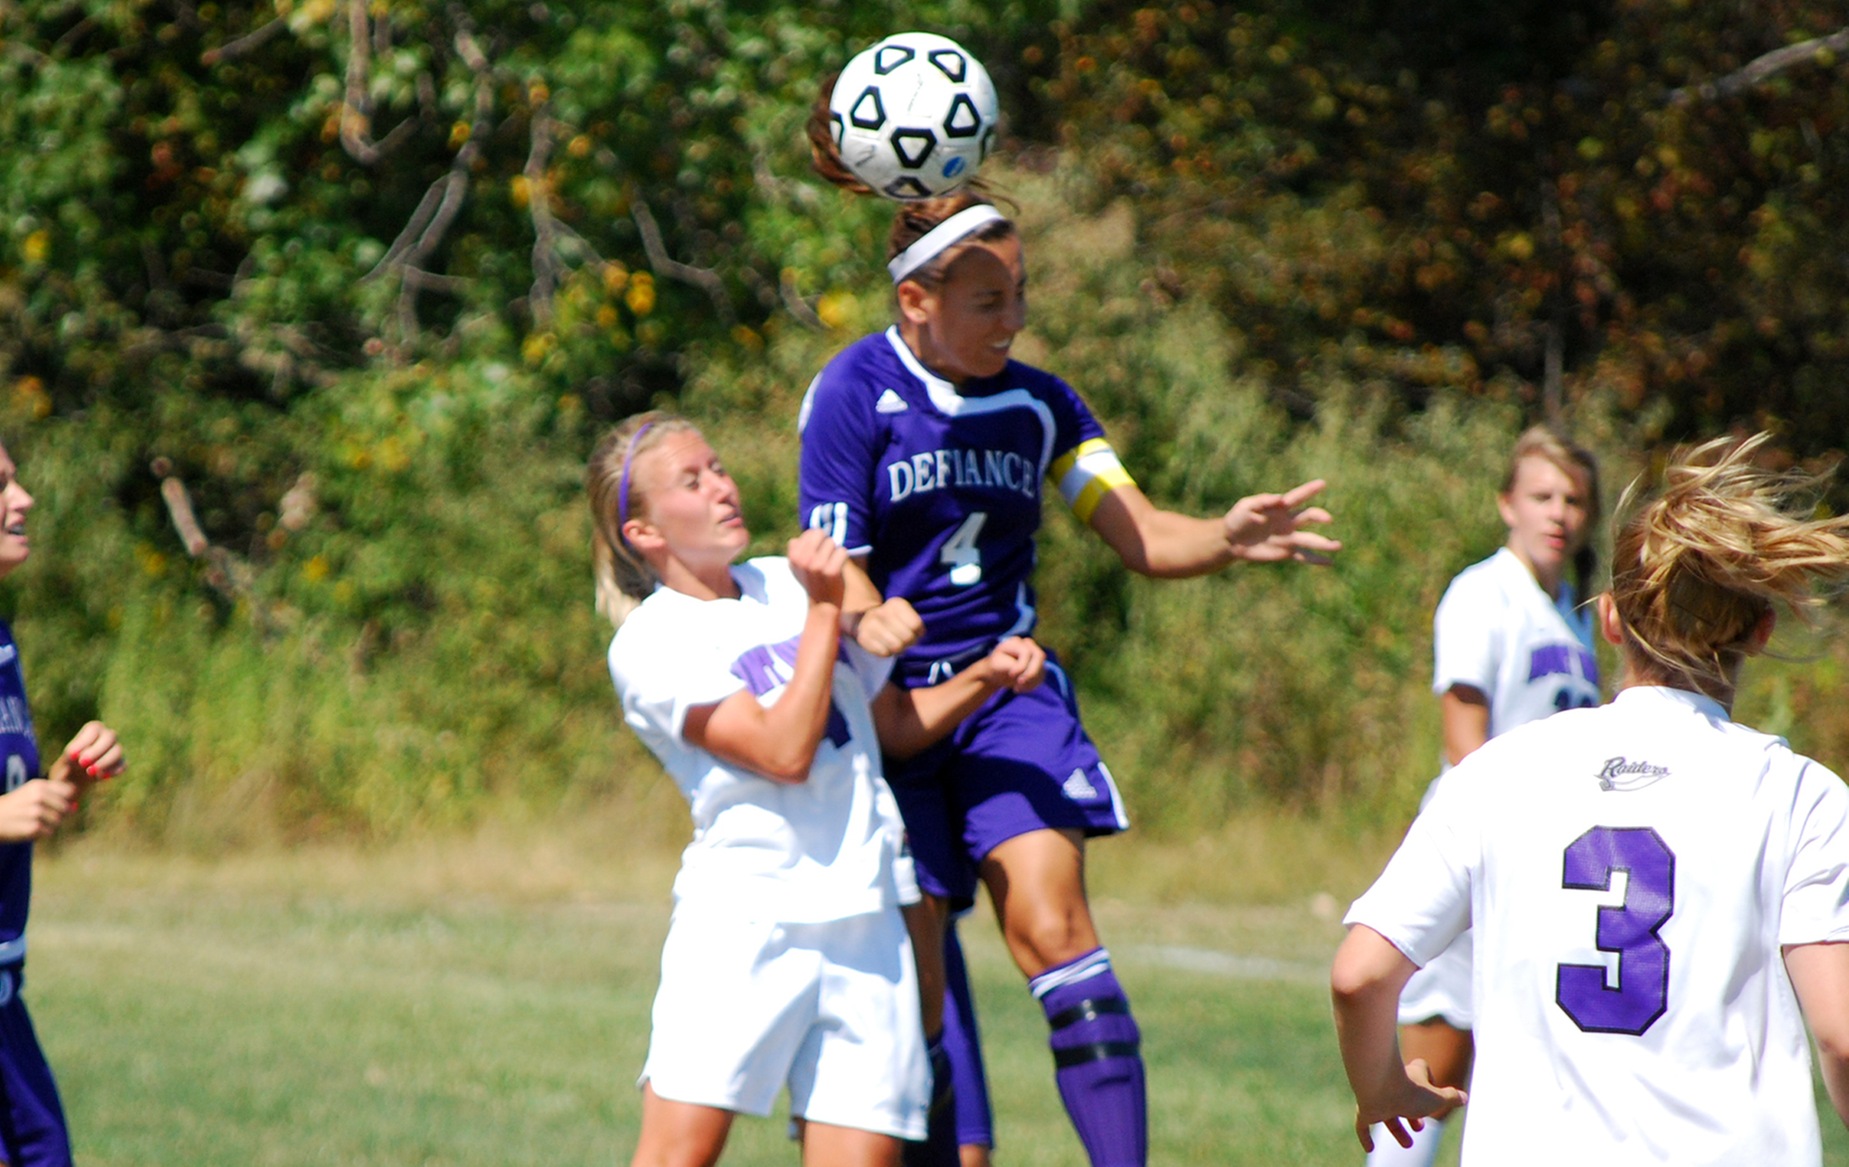 Shutout of Franklin Keeps DC Perfect in HCAC Play